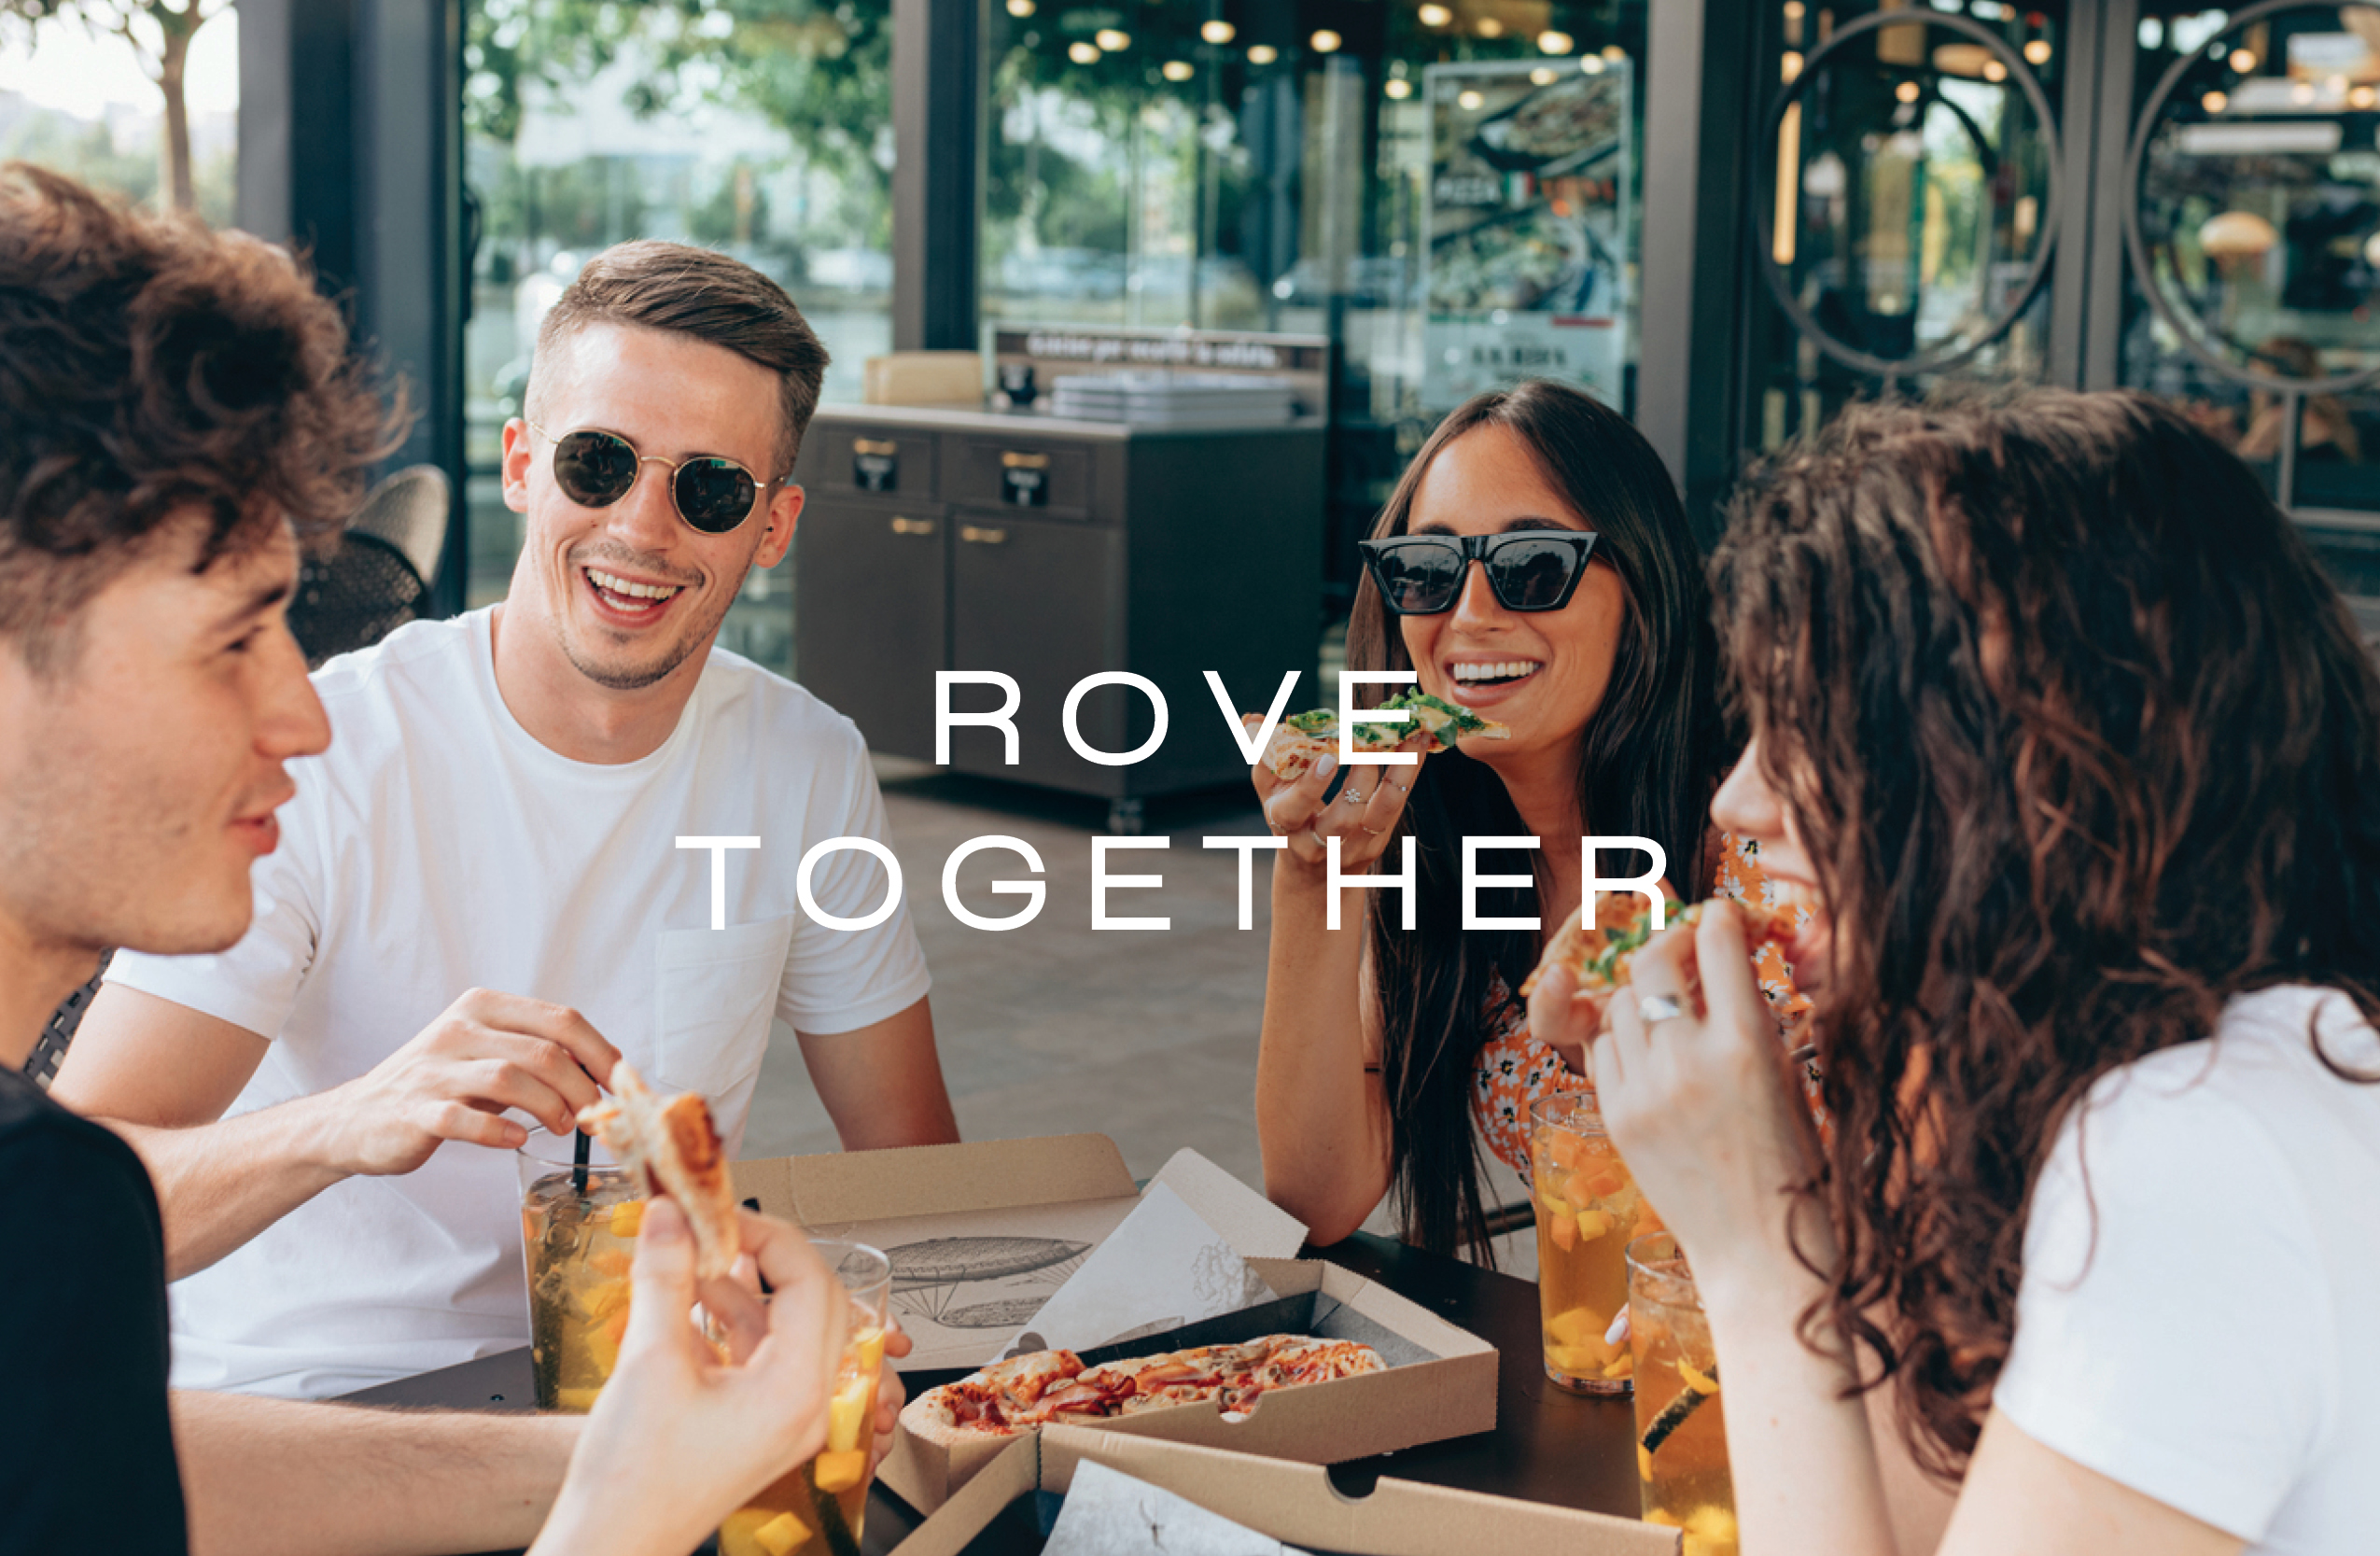 Rove Together; People Sharing a Meal